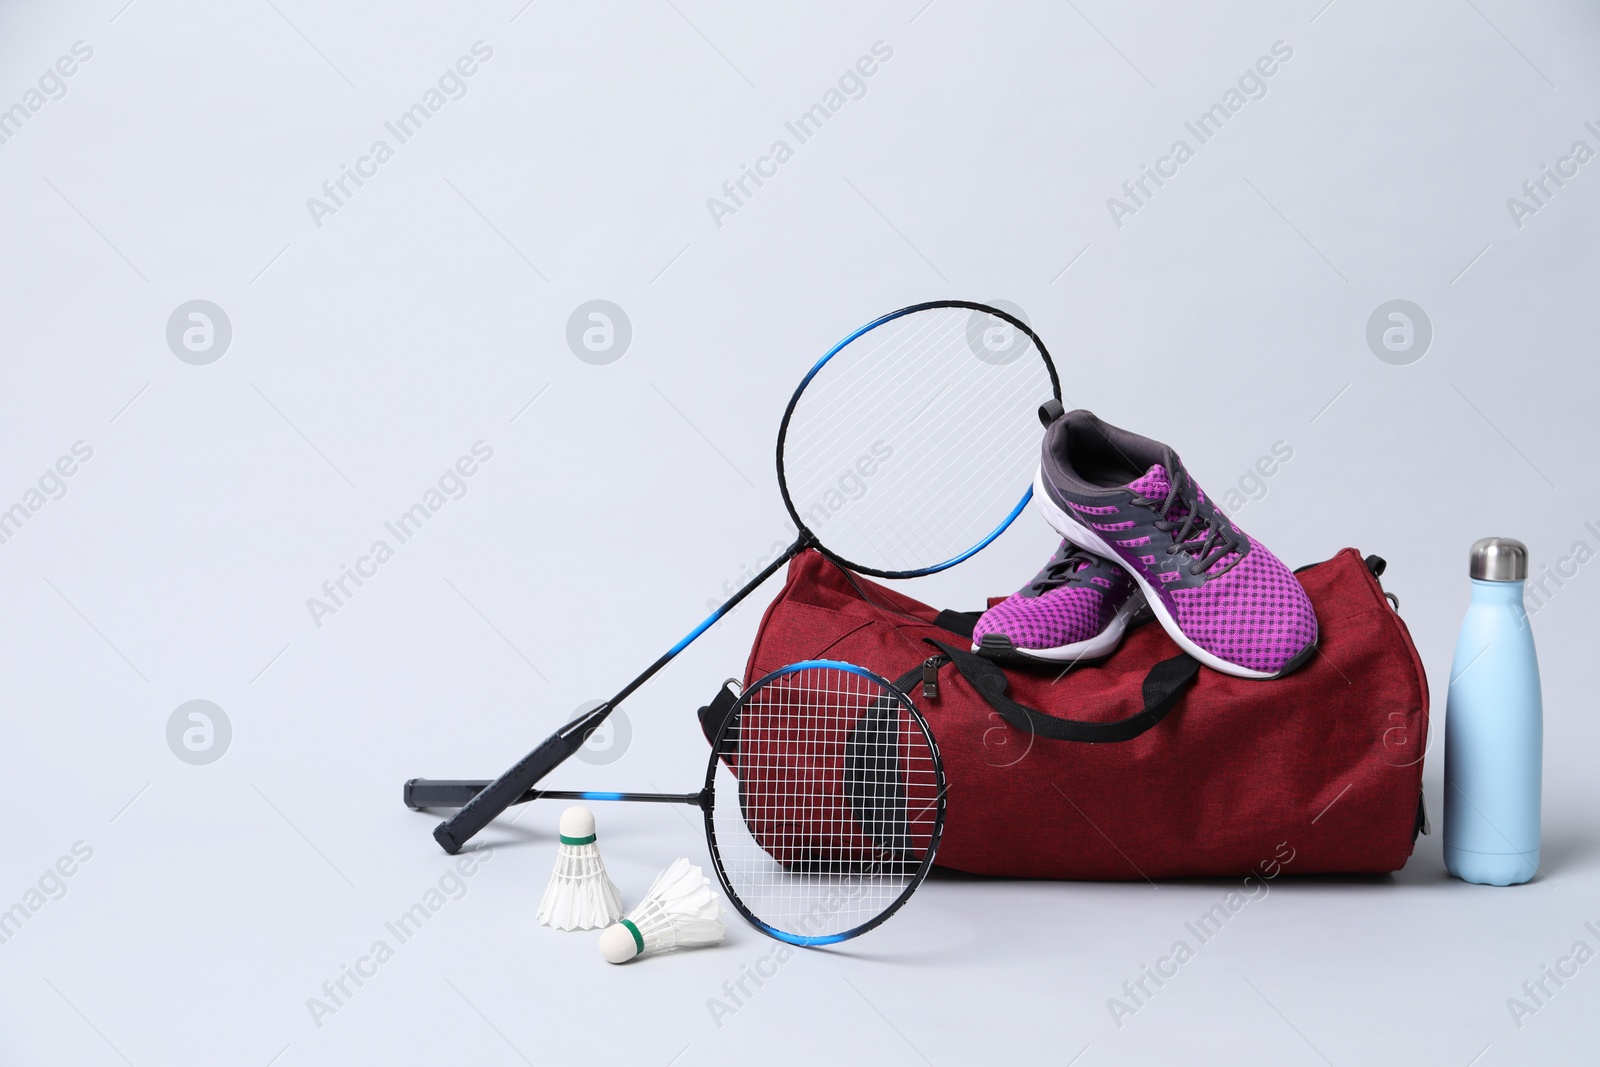 Photo of Badminton set, bag, sneakers and bottle on gray background, space for text